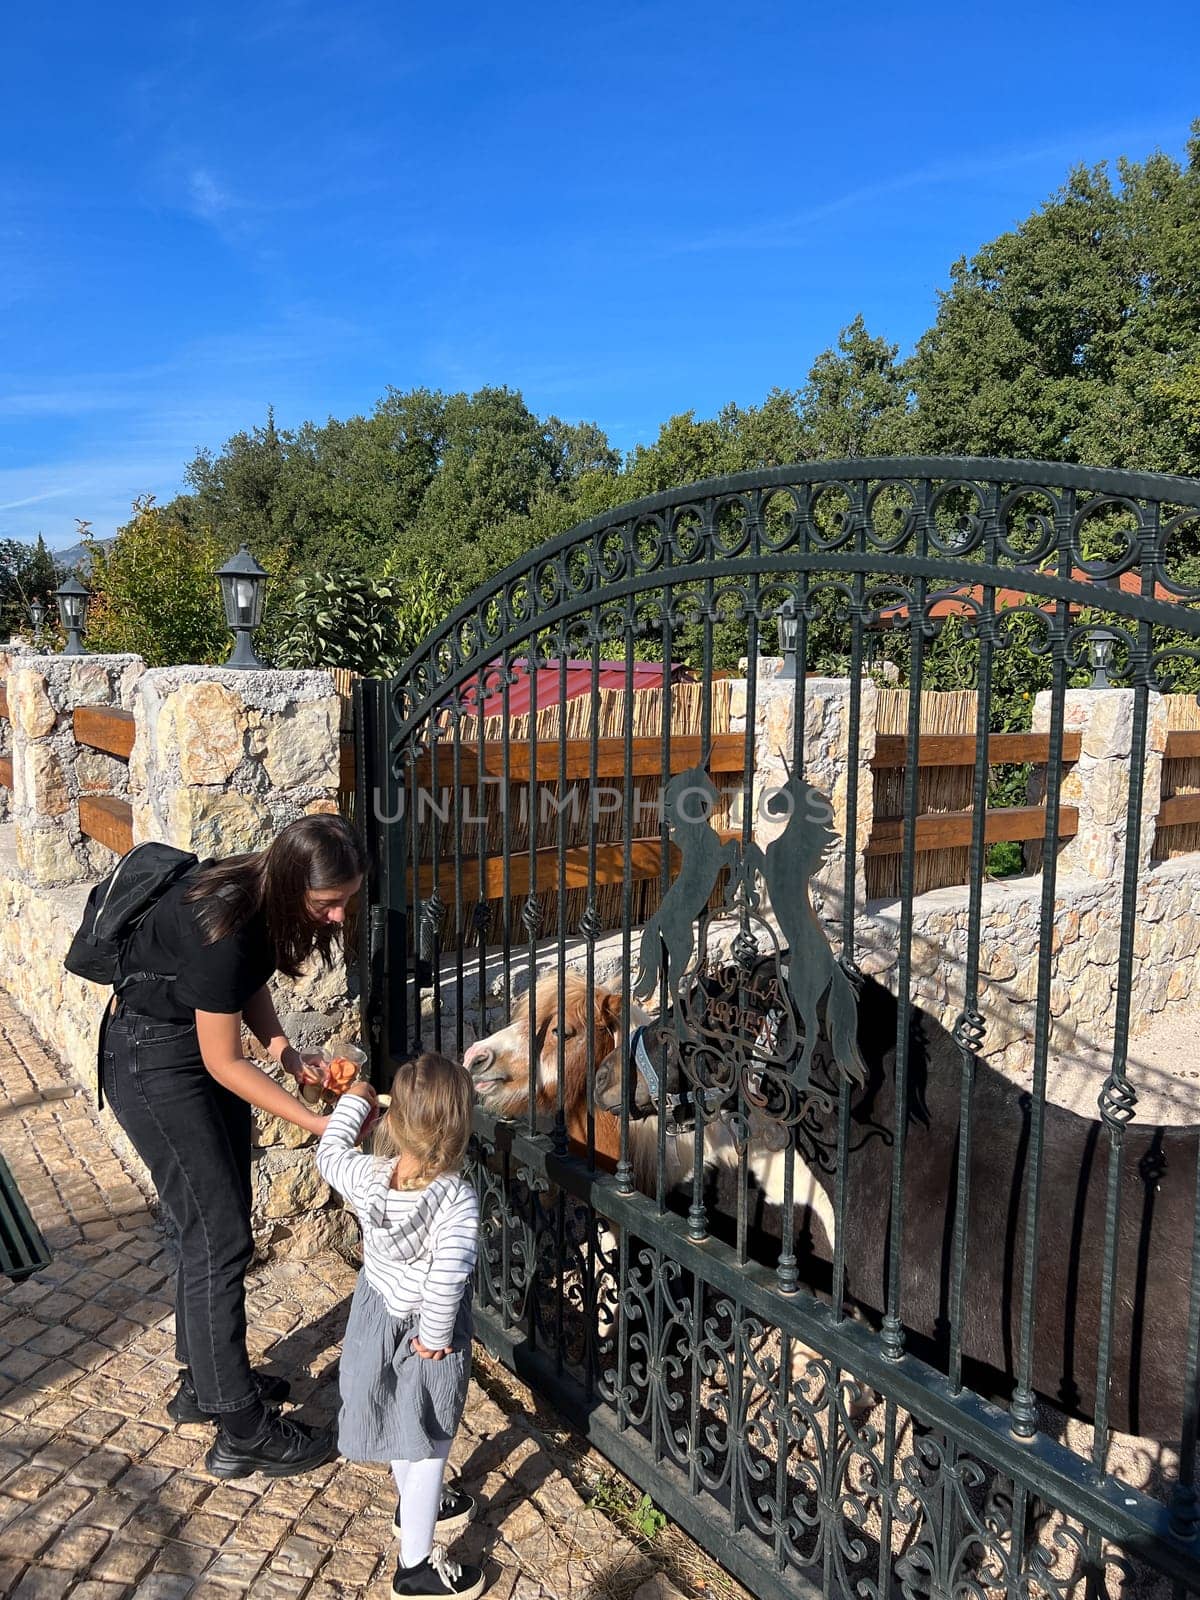 Mom with a little girl feeding a pony behind a metal fence in the park. High quality photo